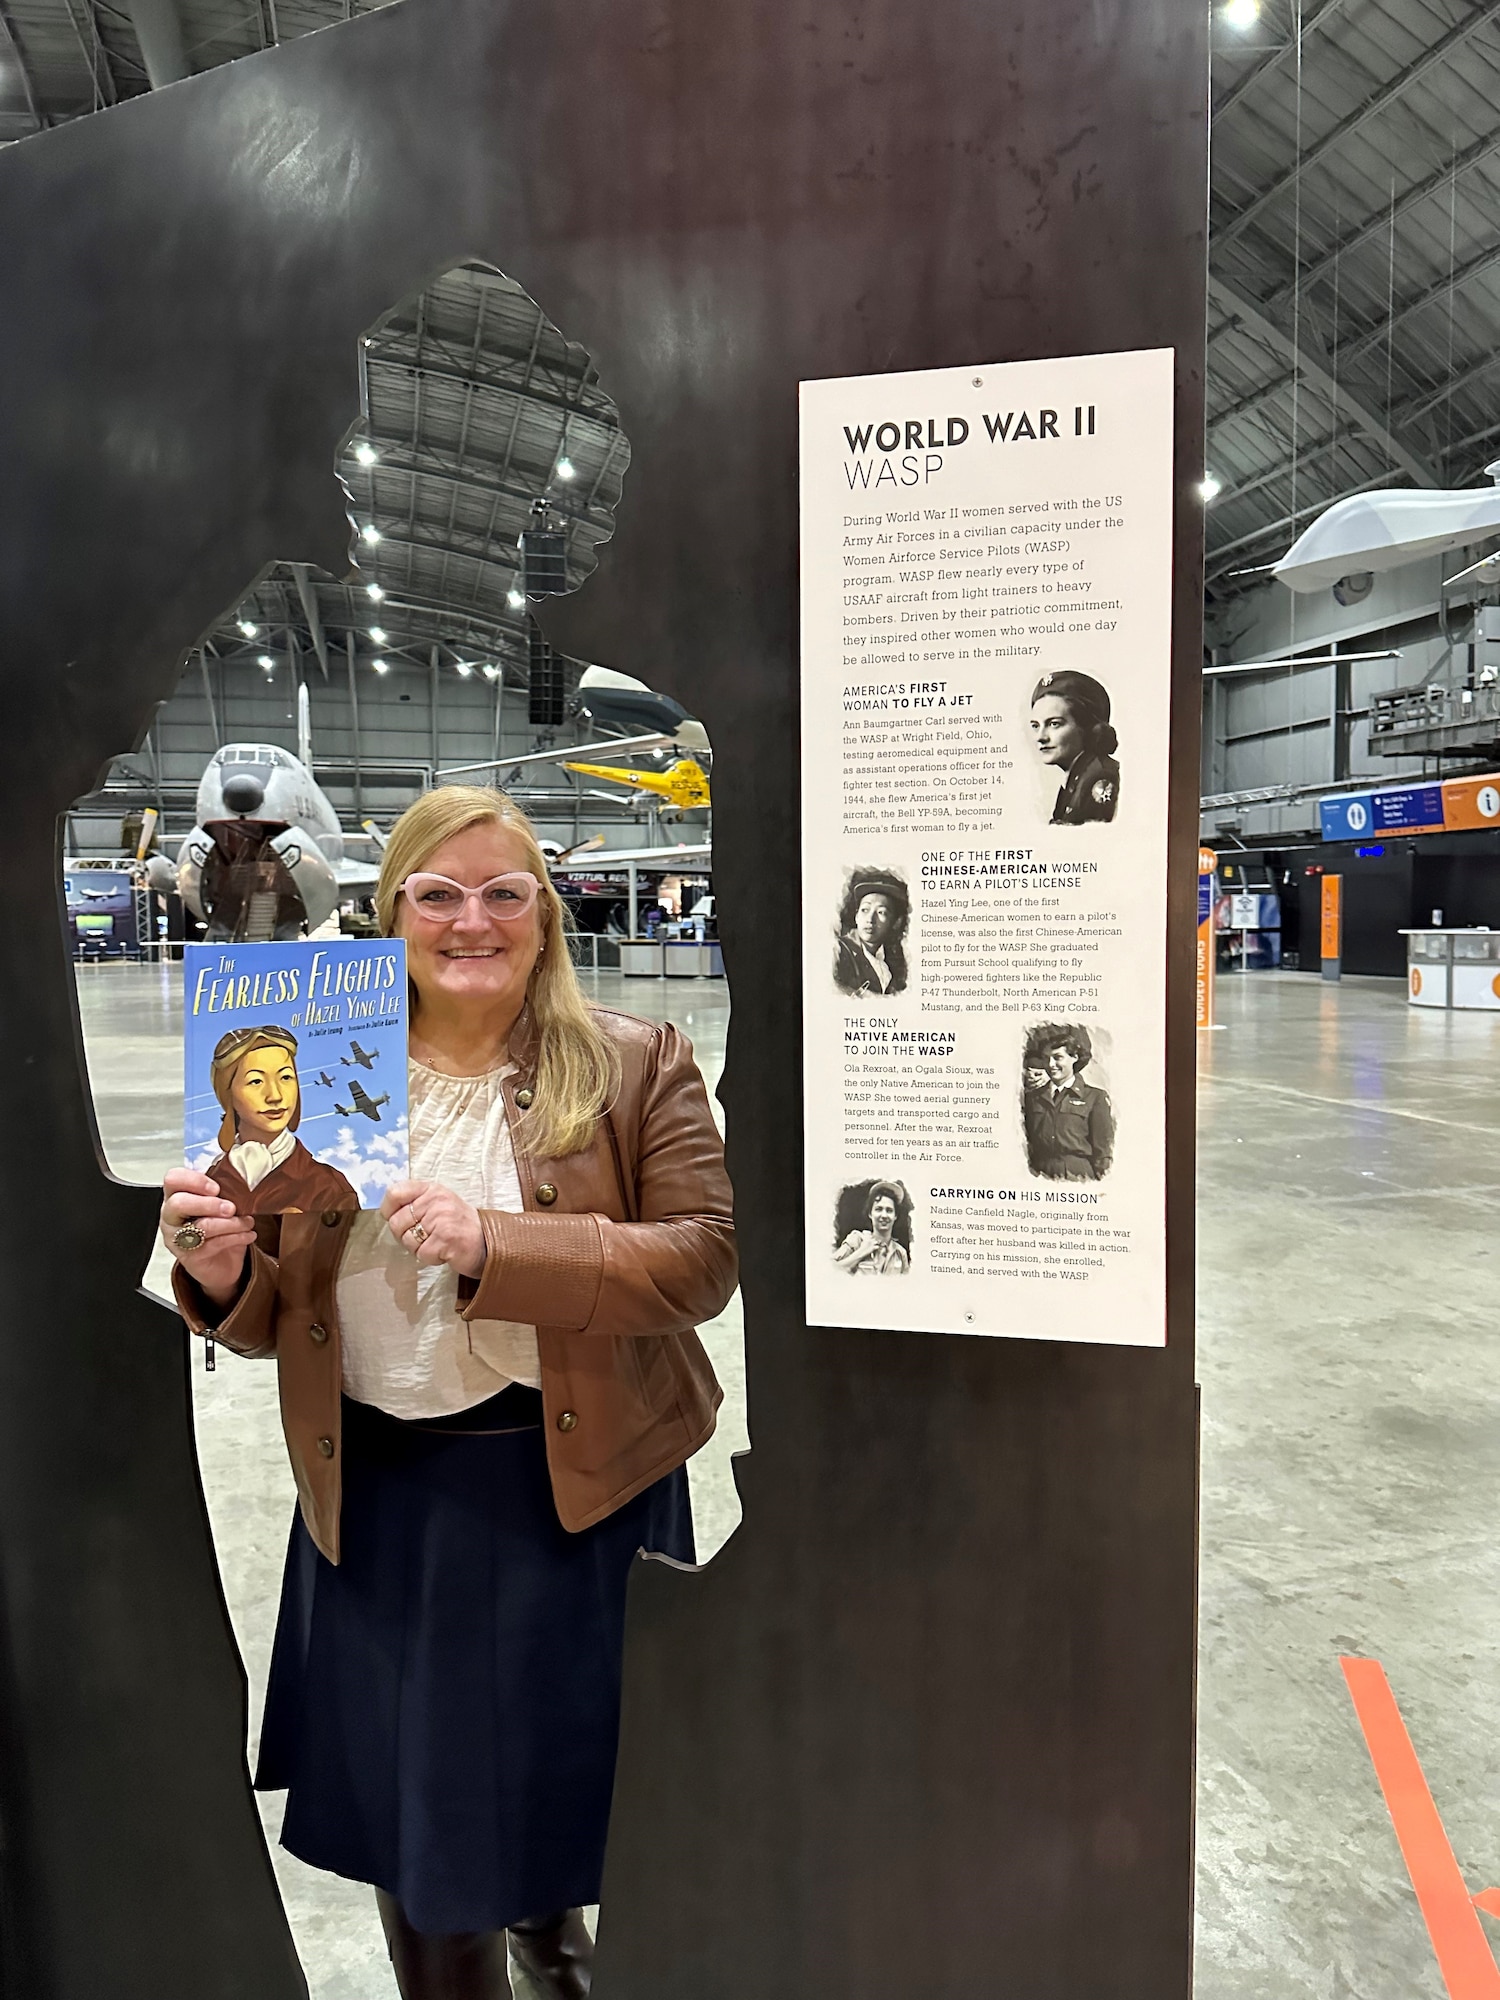 Ohio Education Association CFO Kristy Spires stands in a cut out of of a woman in the Women in the Air Force Exhibit, holding the book Fearless Flights.